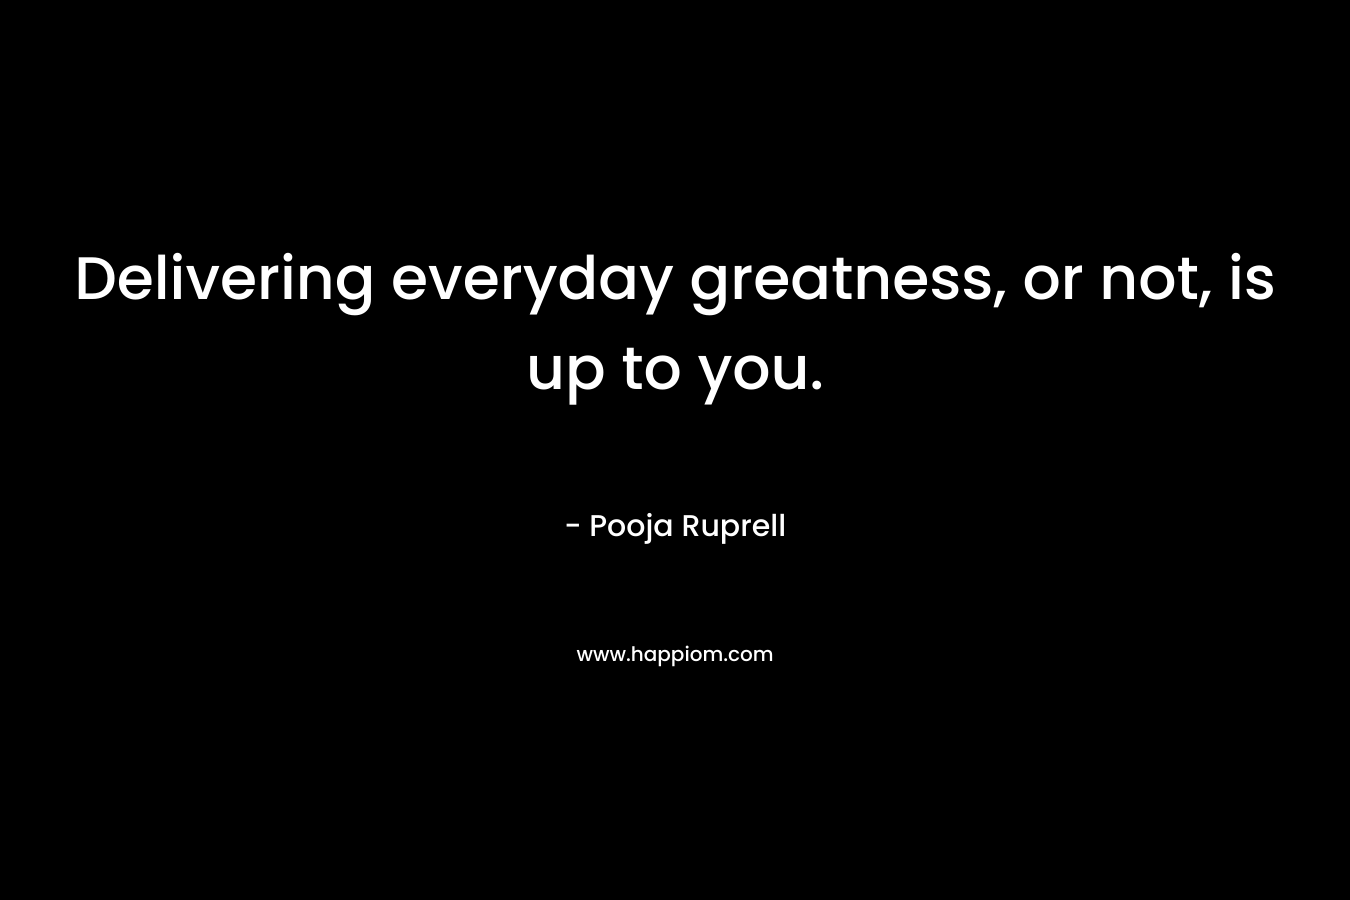 Delivering everyday greatness, or not, is up to you.